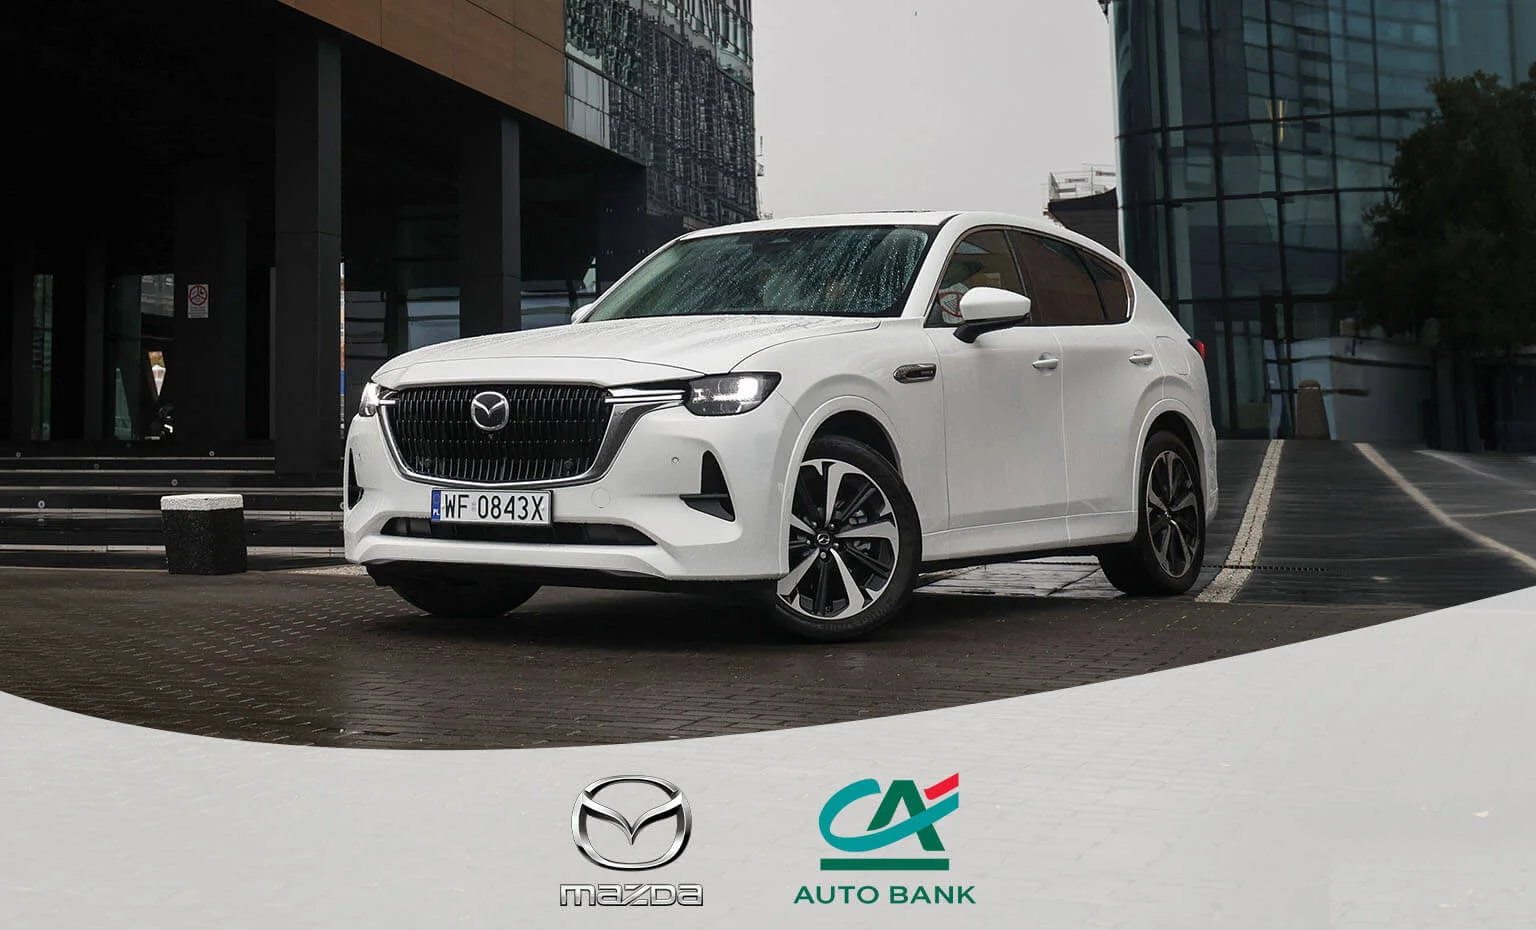 Mazda expands its collaboration with CA Auto Bank and Drivalia in Europe